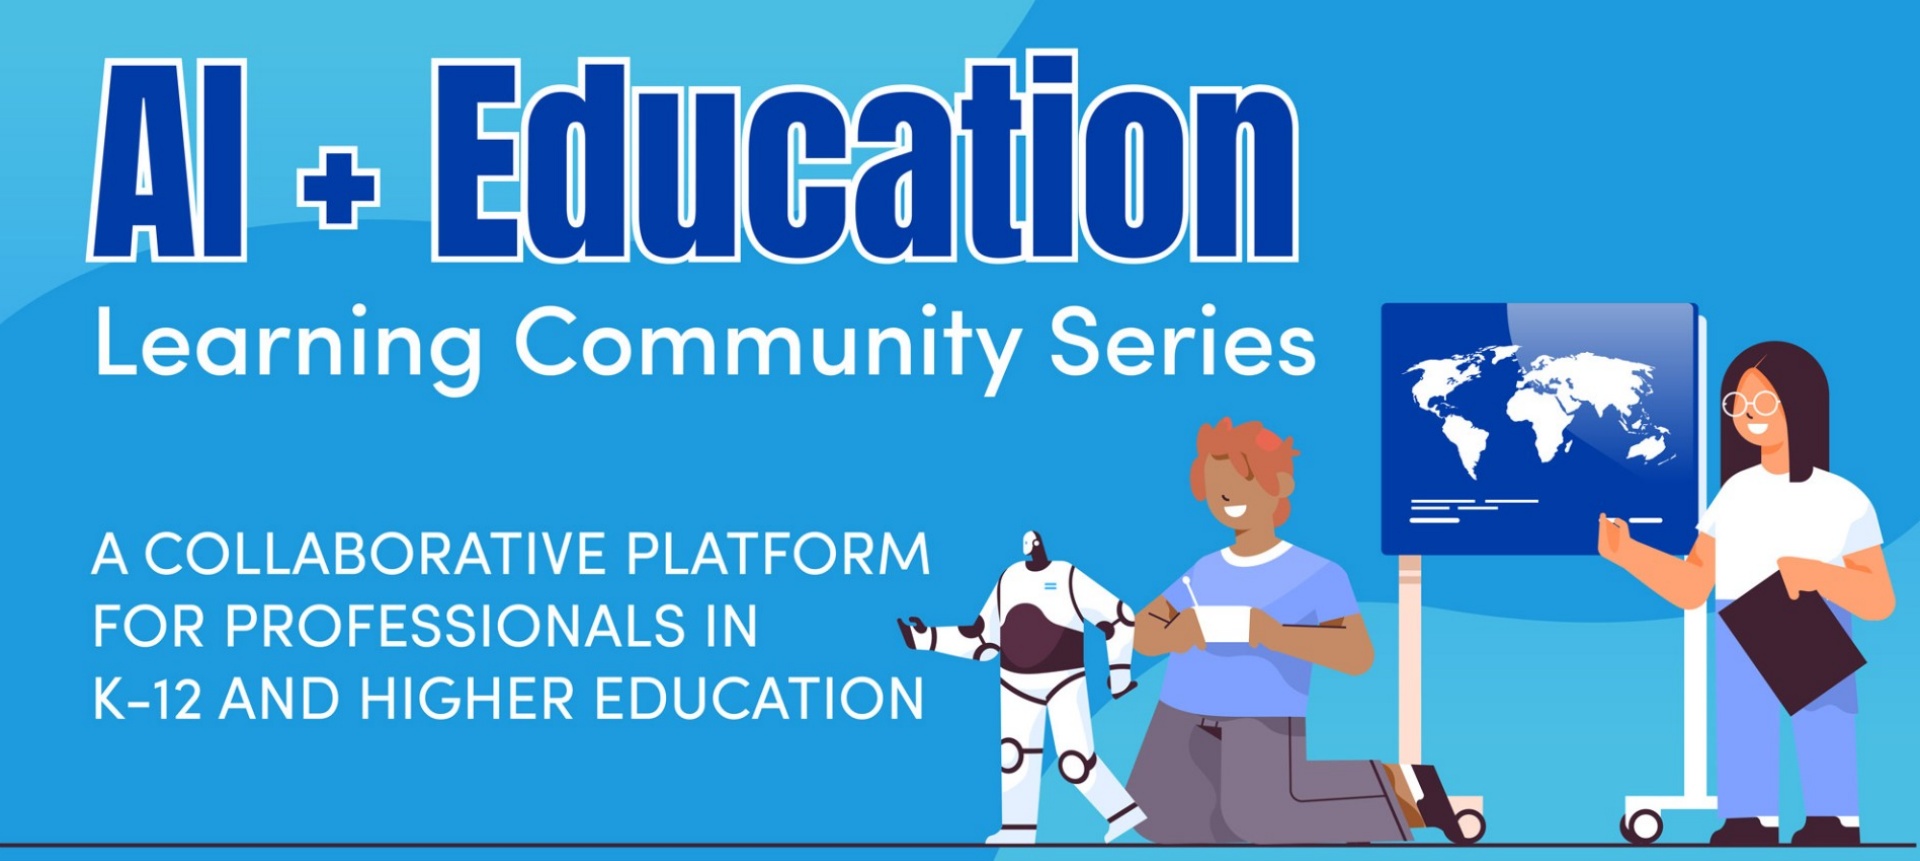 AI + Education Learning Community Series; A collaborative platform for professionals in K-12 and higher education. 